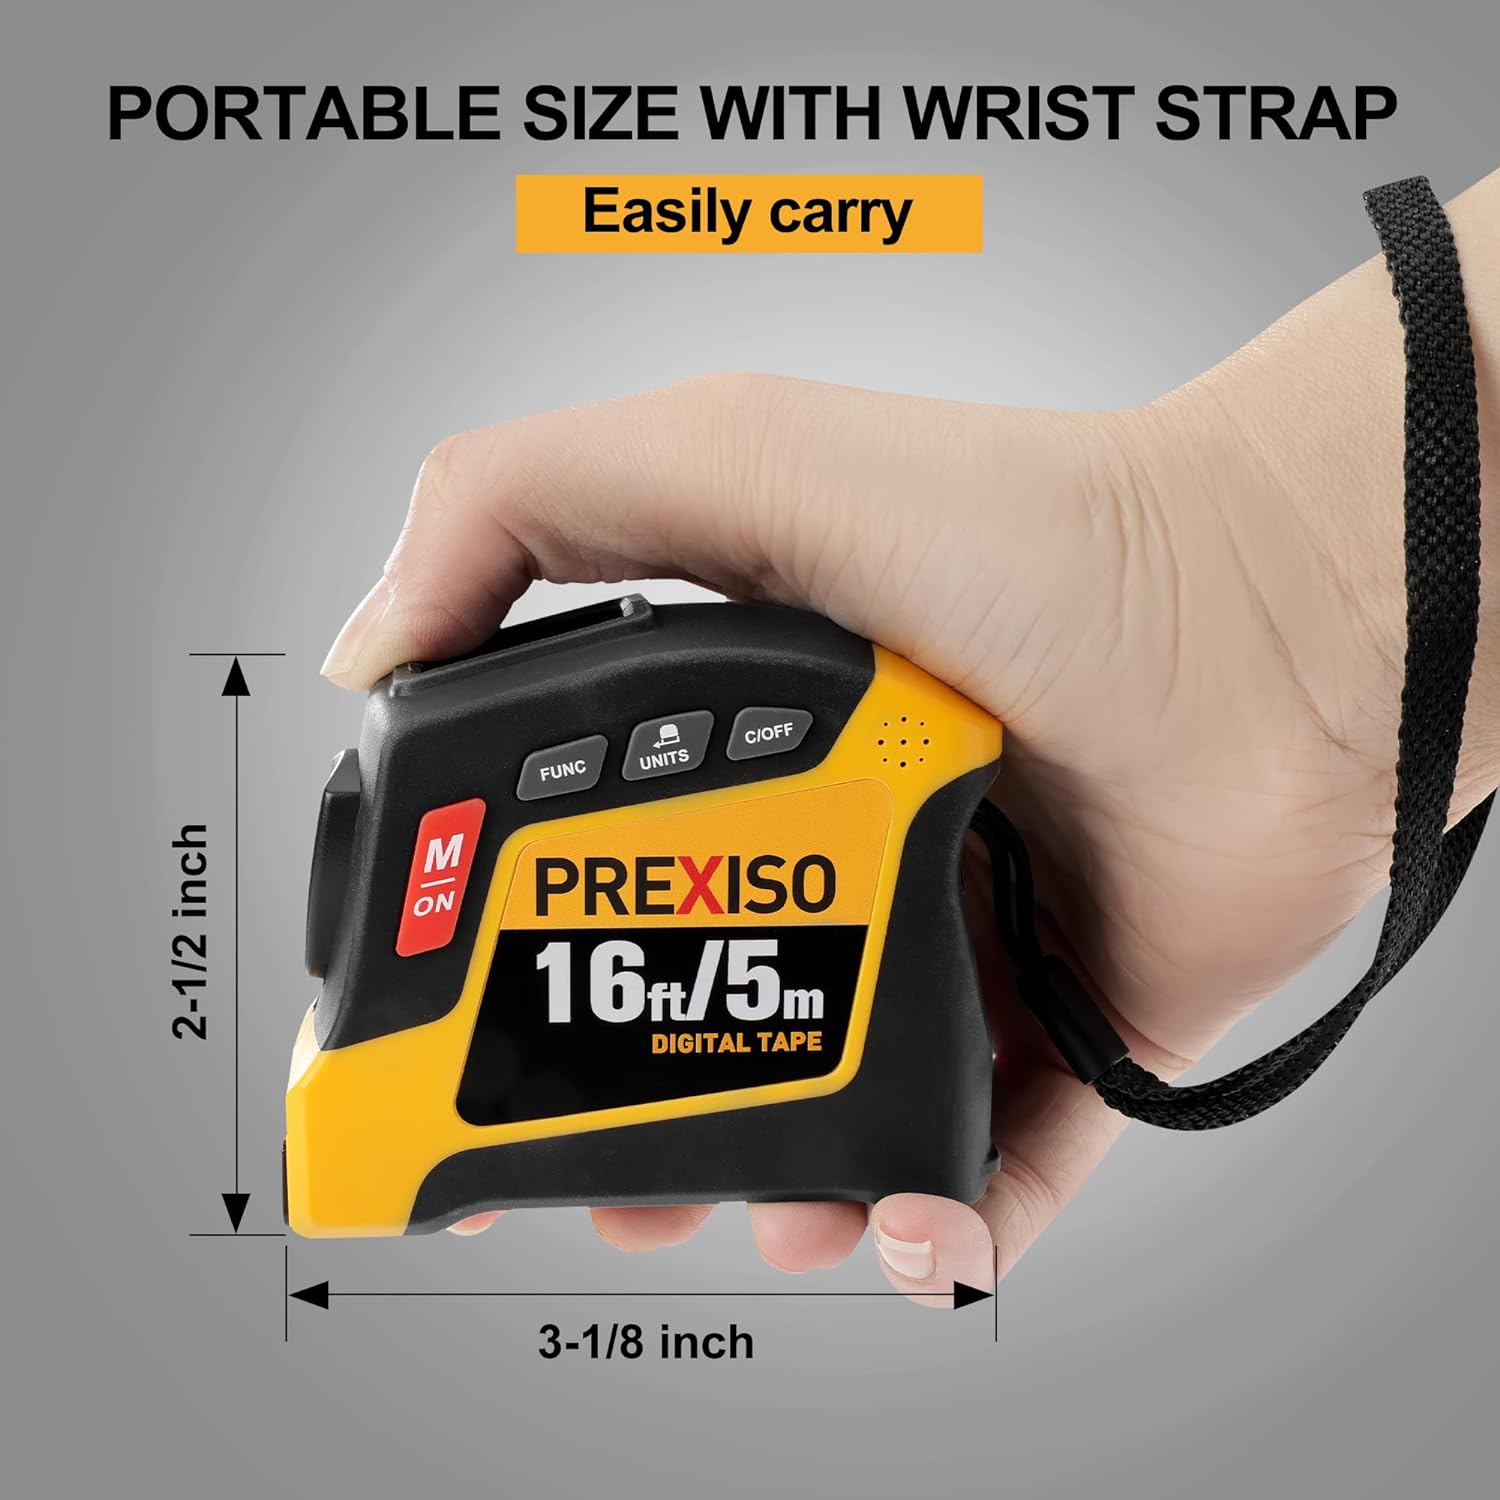 2-in-1 Digital Tape Measure - 16Ft Rechargeable, Metric & Imperial Units, Magnetic Tip